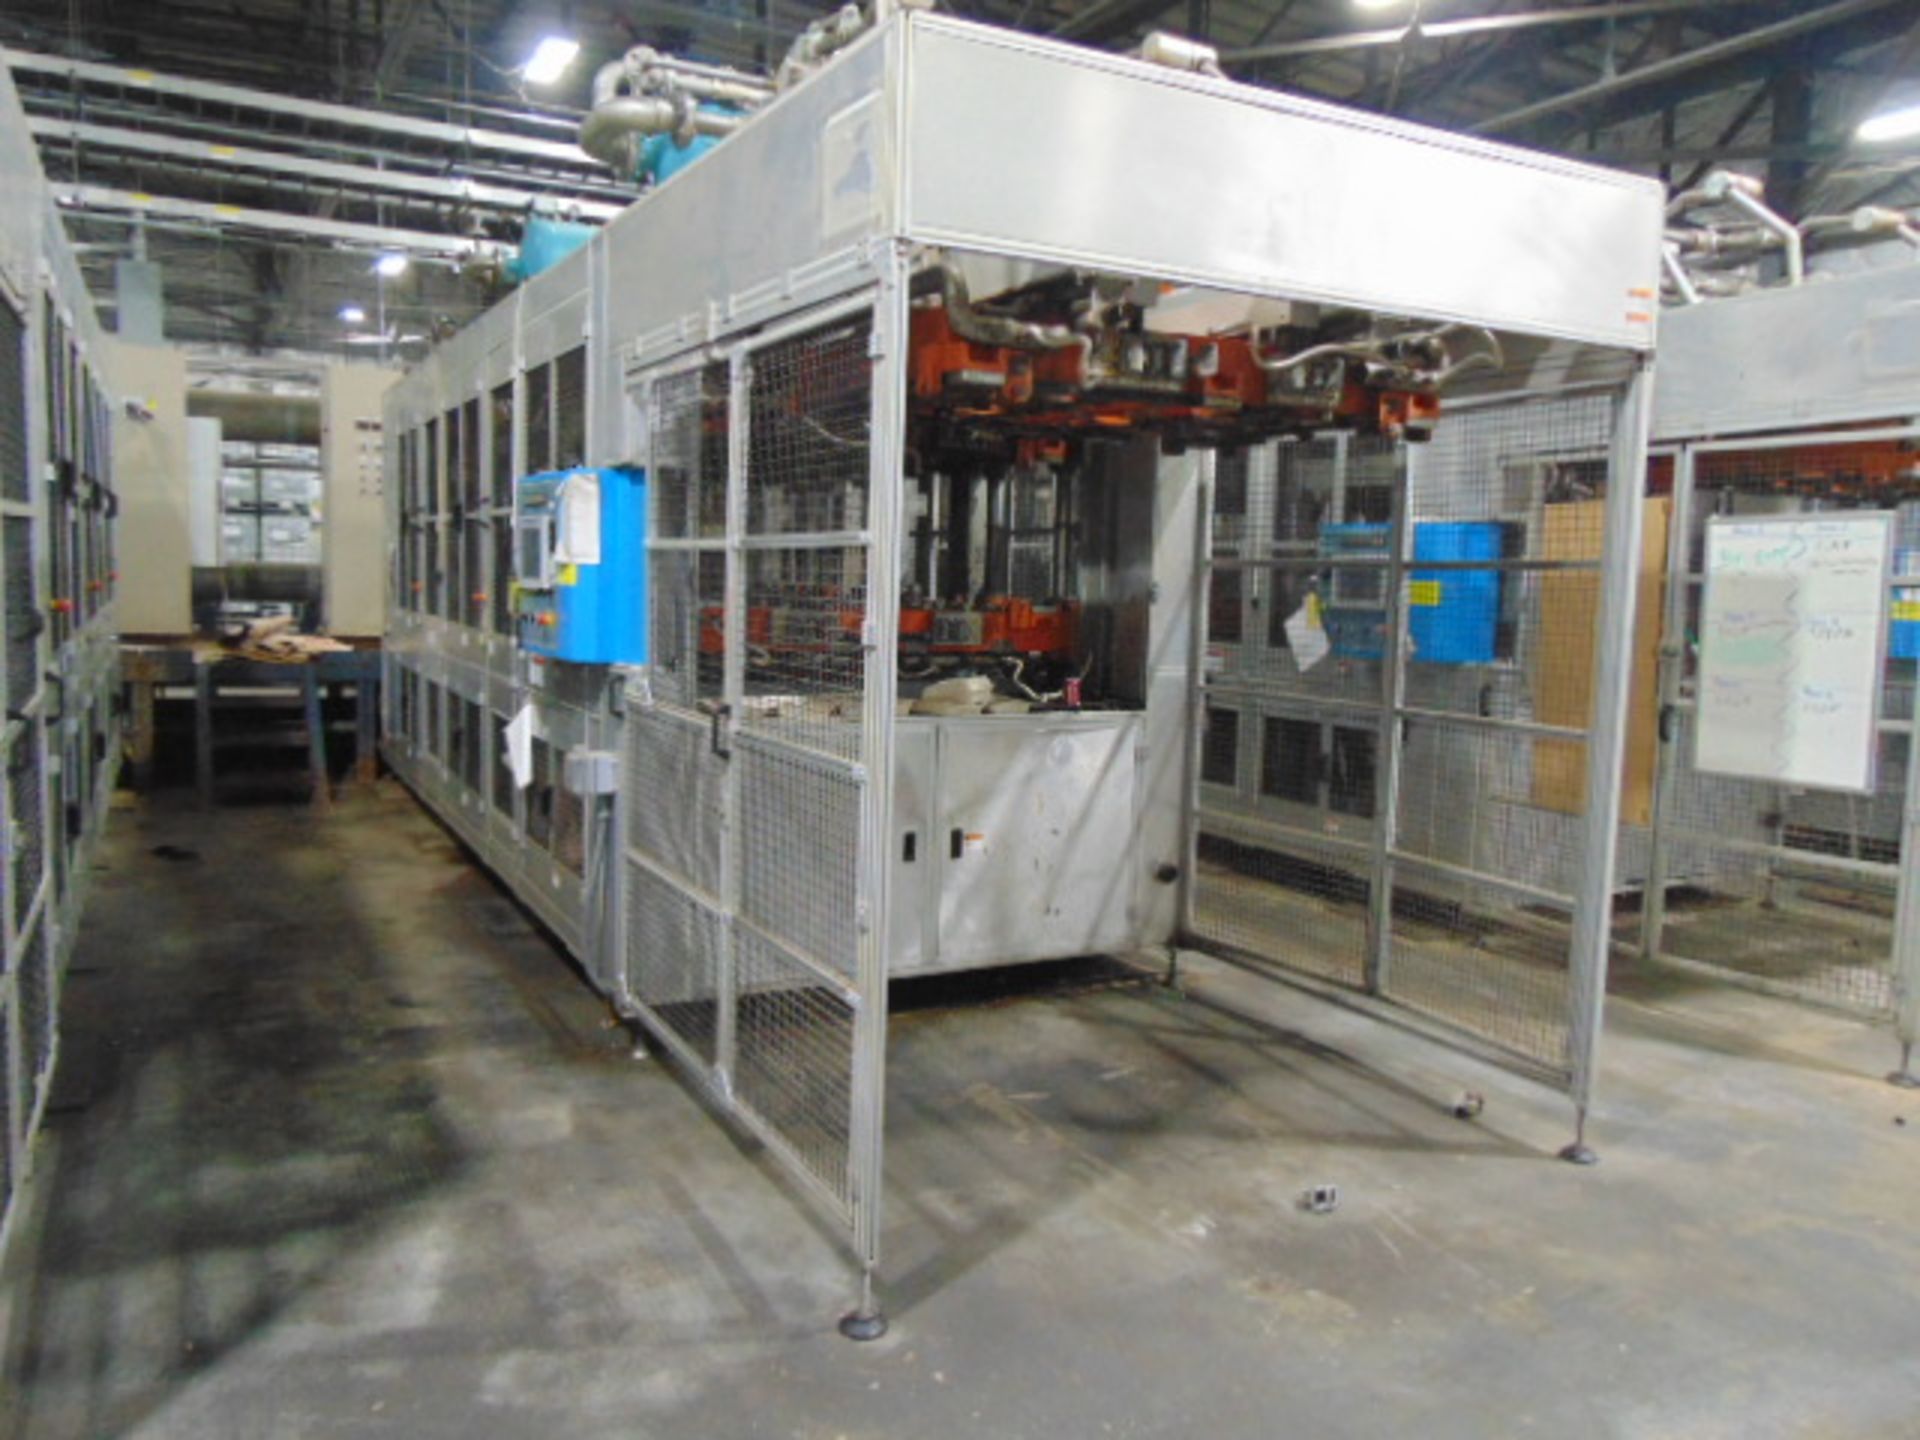 THERMOFORMING MACHINE, TAIWAN PULP MOLDING MDL. TPM-1500, mfg. 5/2015, installed 2016, 1500mm x